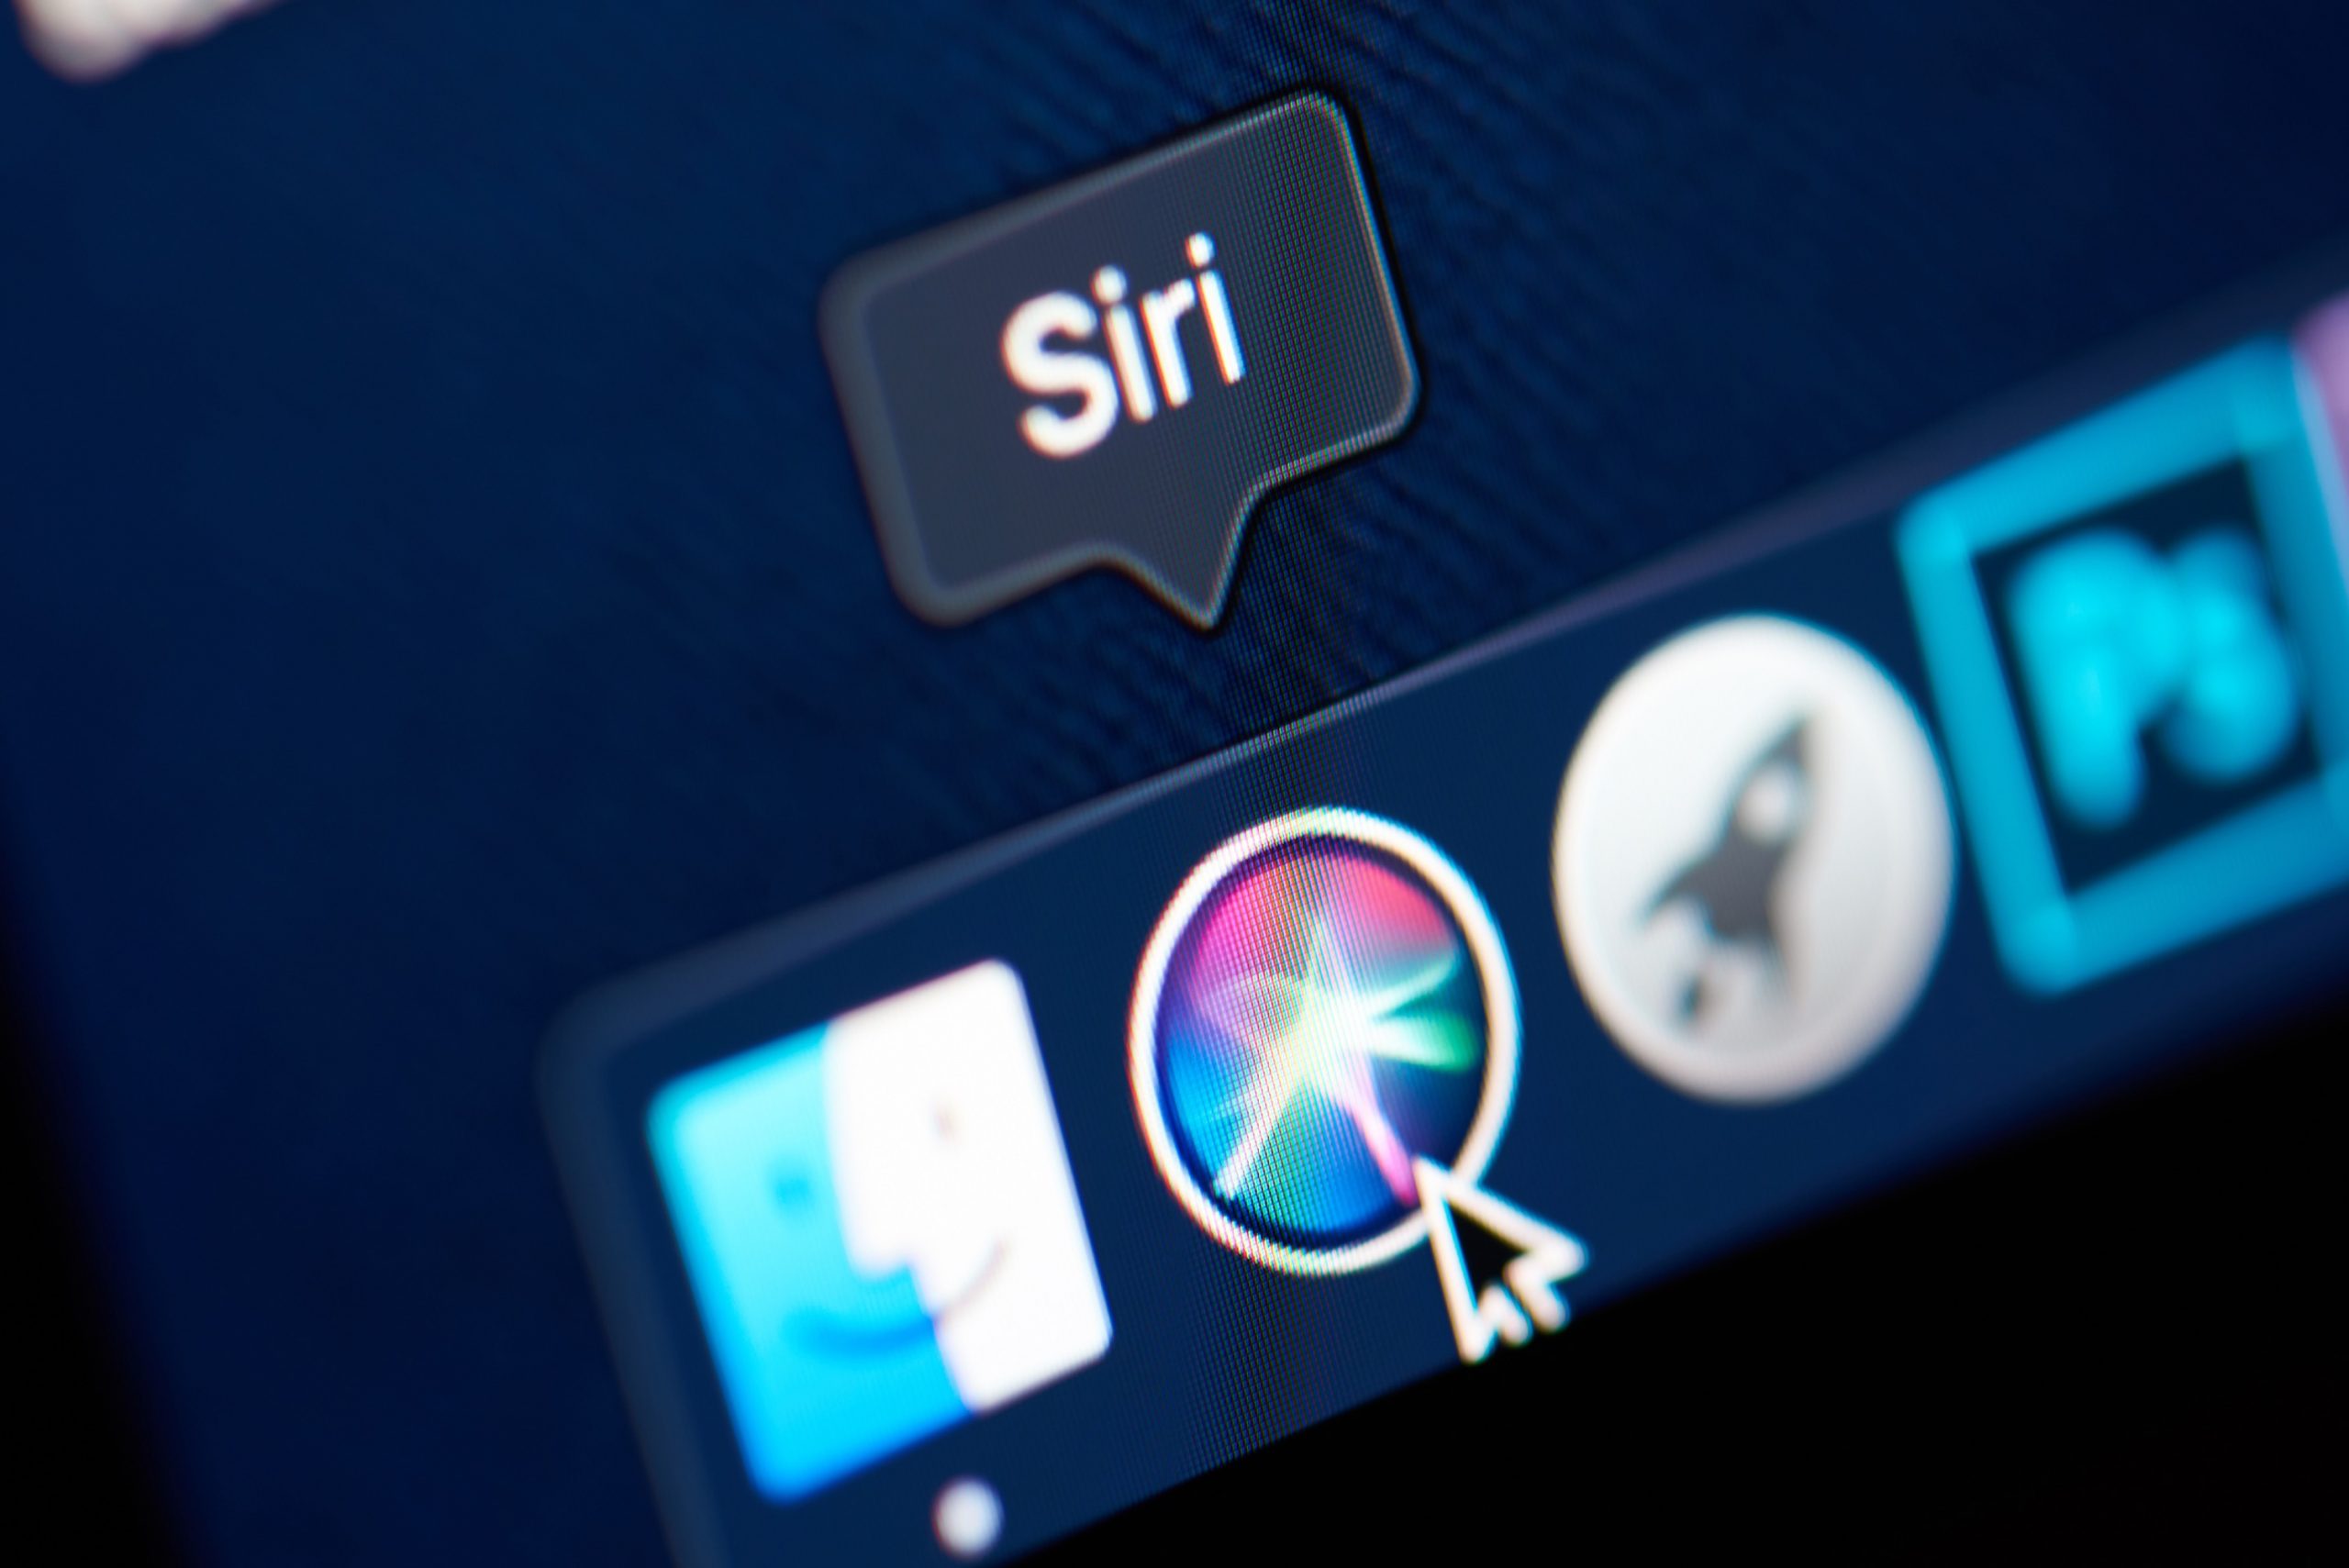 Company sues Apple for alleged Siri patent infringement